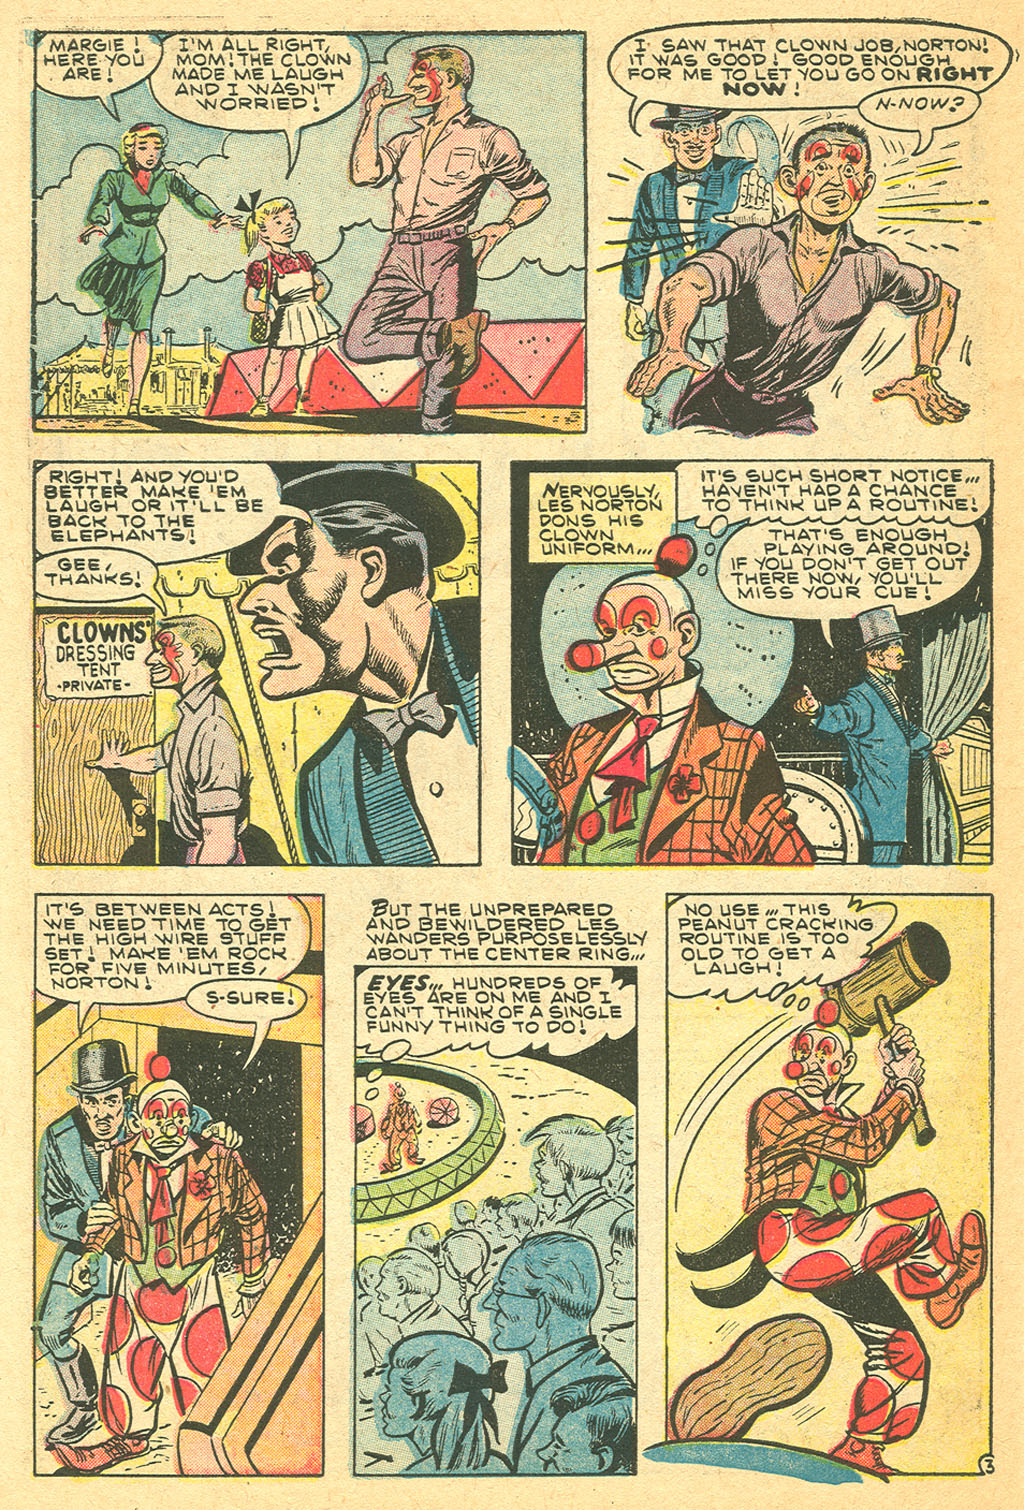 Marvel Tales (1949) 139 Page 29